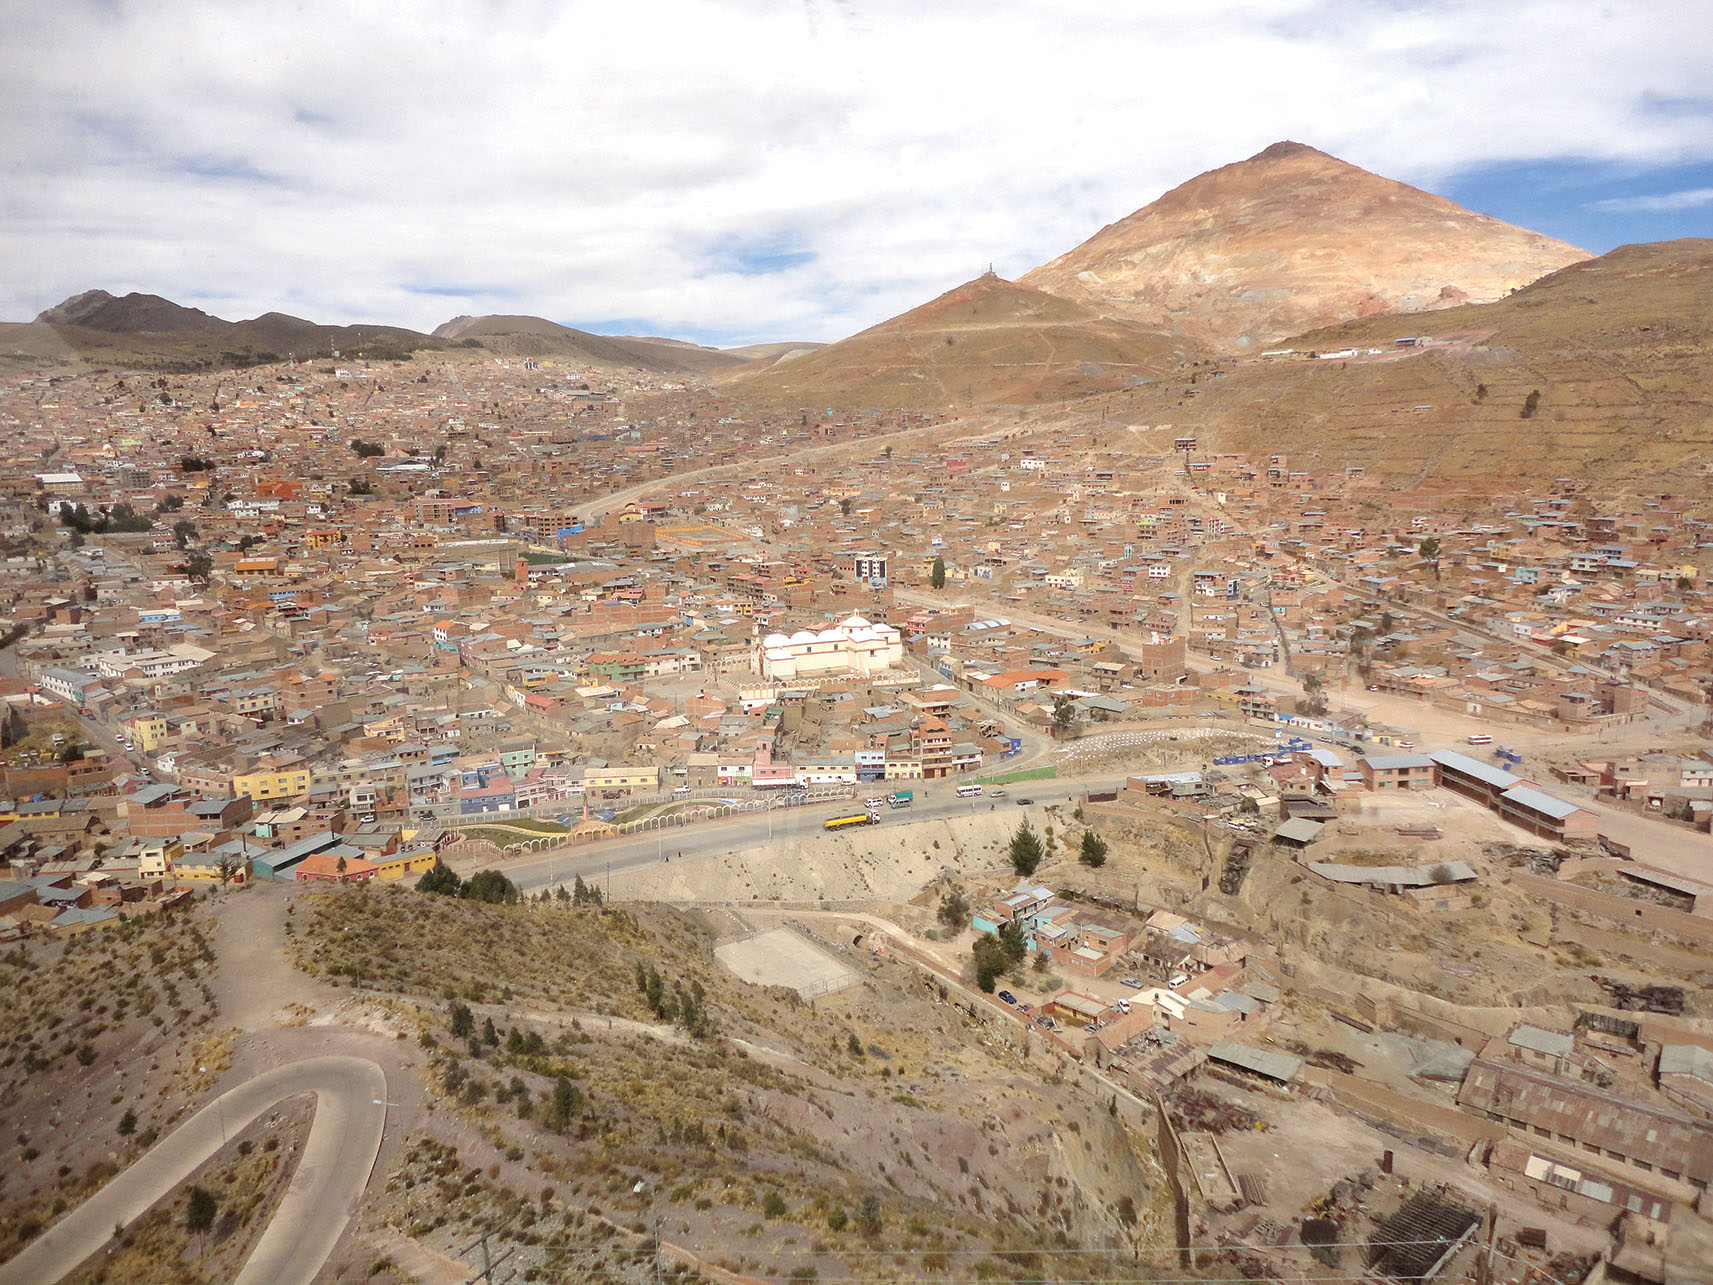 The city of Potosí and the Cerro Rico amidst the surrounding dry mountain landscape. (Photo by Andrea Marston.)